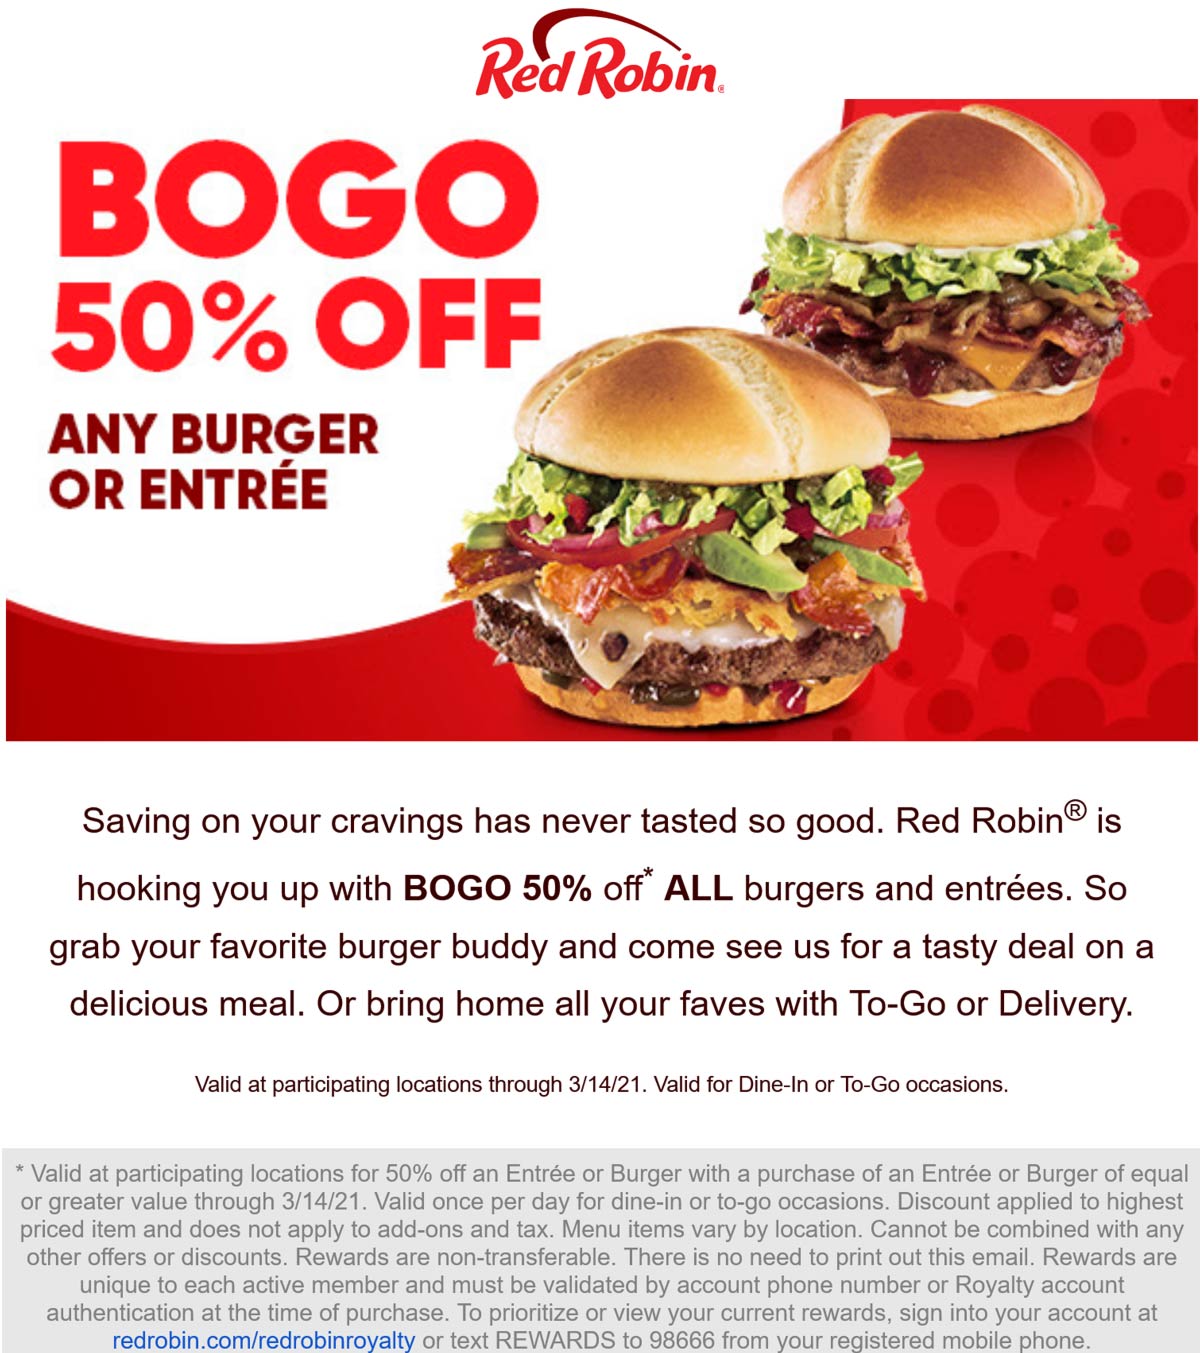 Red Robin restaurants Coupon  Second entree or burger 50% off at Red Robin yum #redrobin 